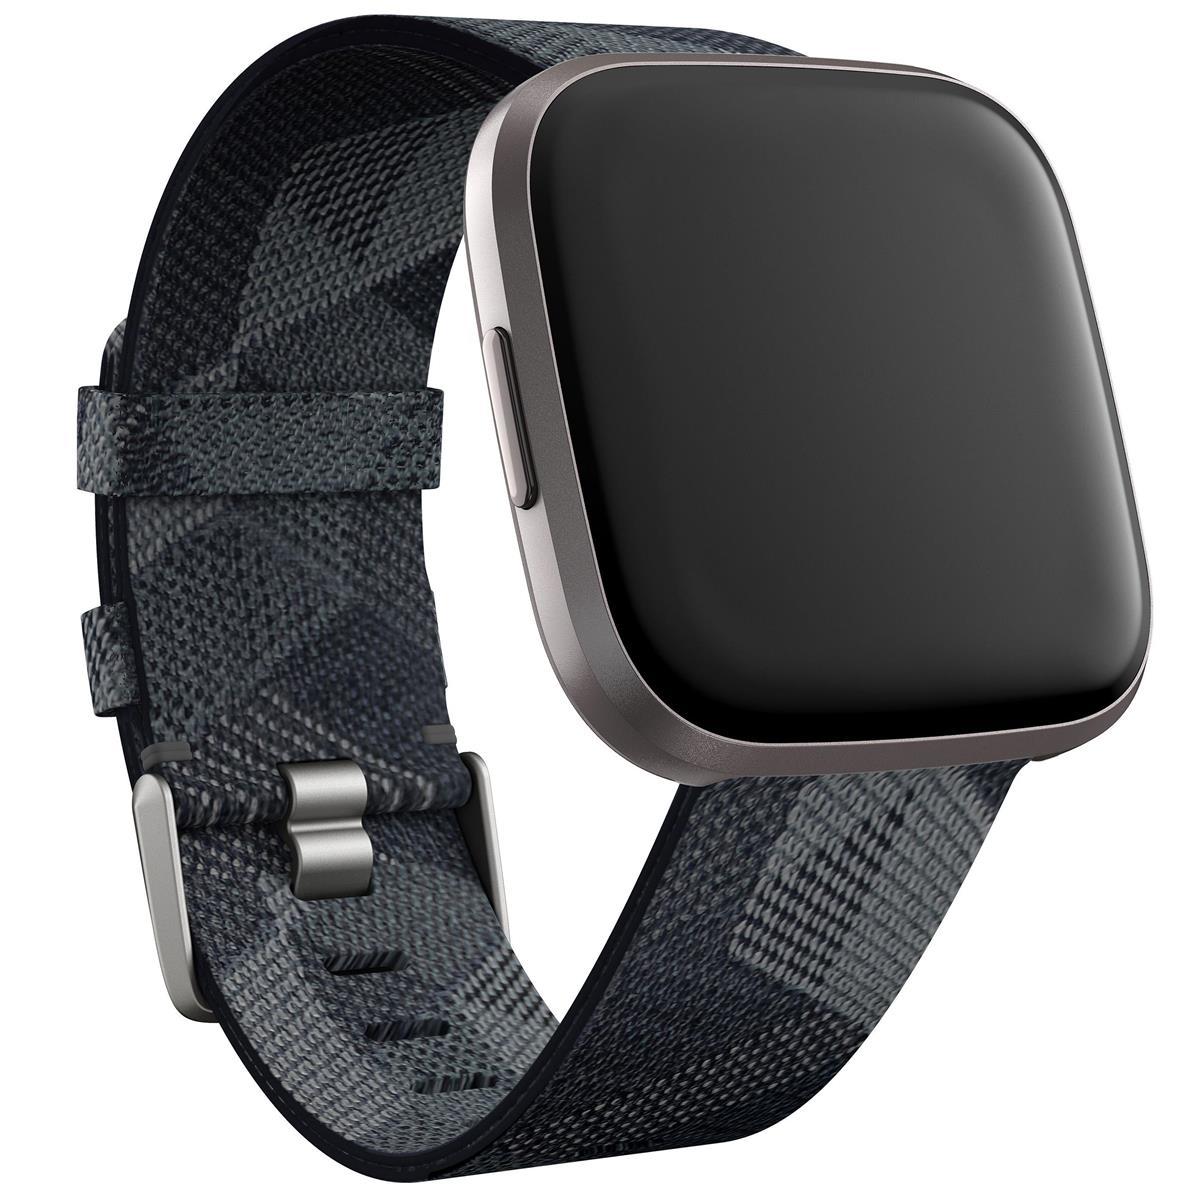 Fitbit Versa 2 Special Edition Health and Fitness Smartwatch Smoke Woven/Mist Gray Aluminum